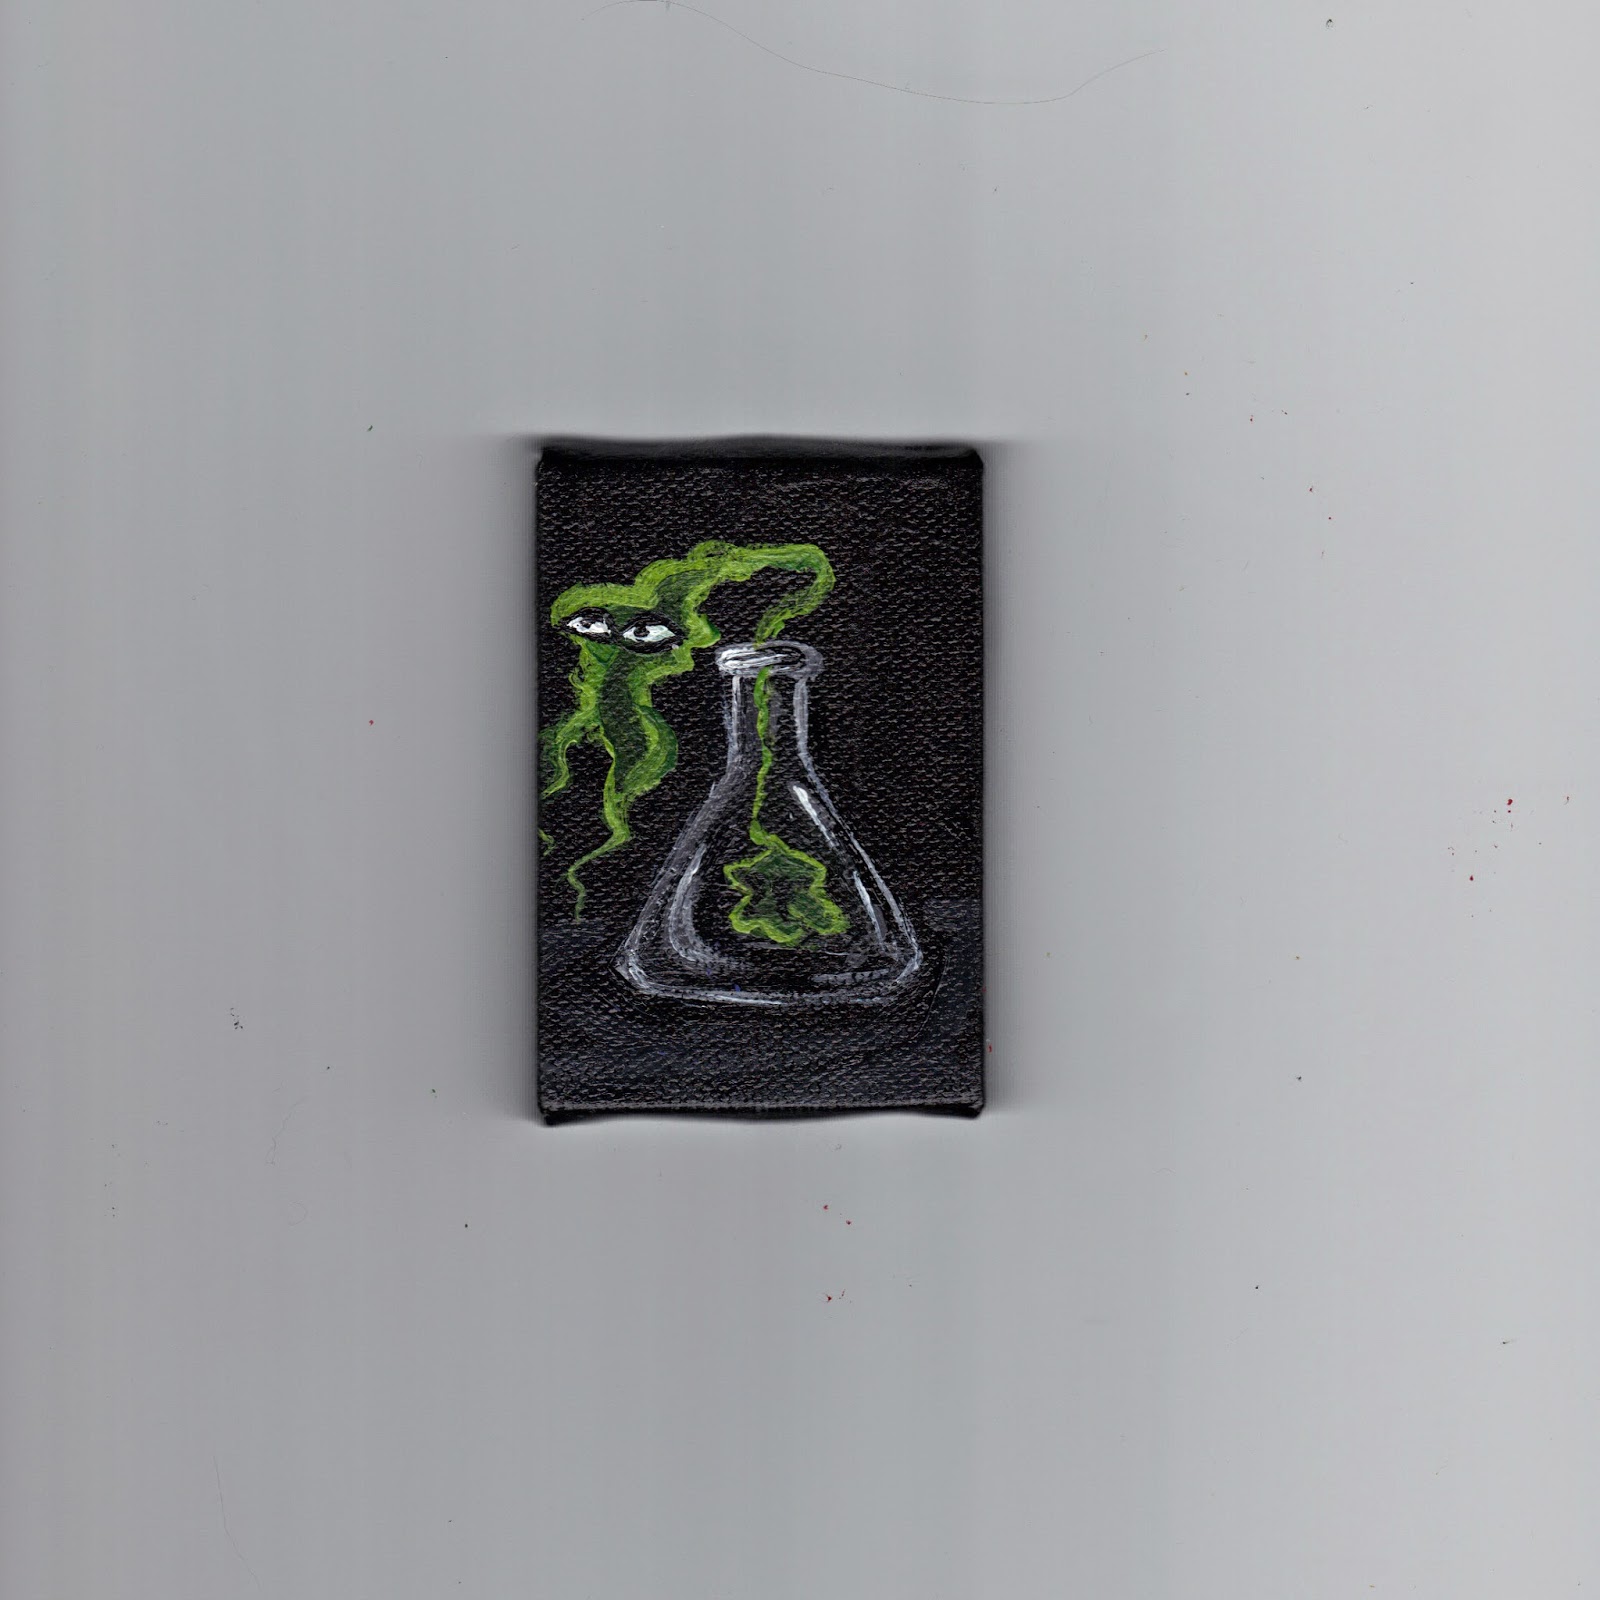 https://www.etsy.com/listing/170292095/miniature-acrylic-painting-green-ghost?ref=shop_home_active_11